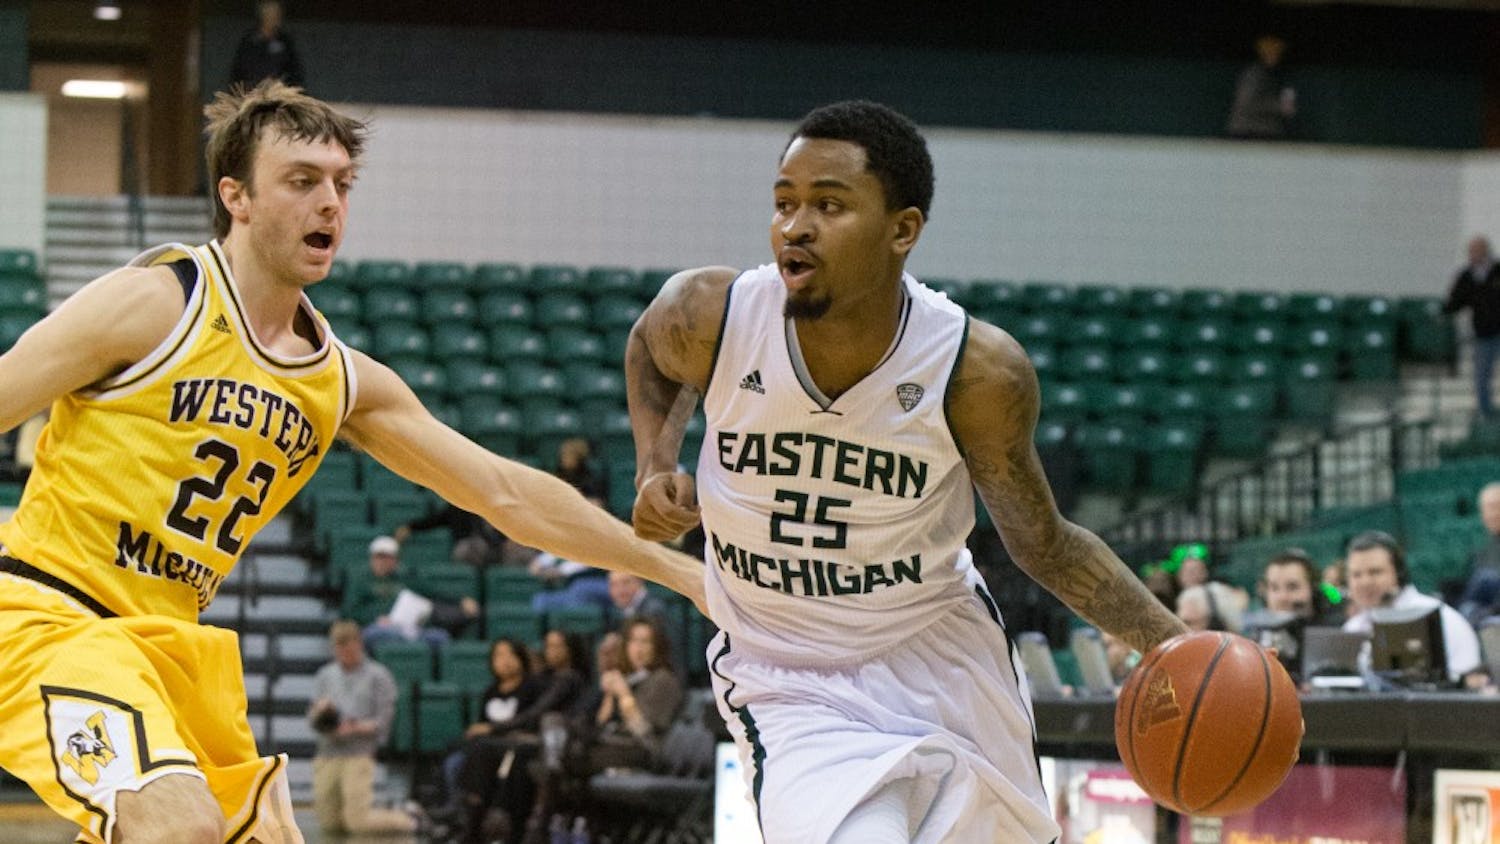 EMU guard Darell Combs (25) drives past WMU's Austin Richie (22) in Eastern Michigan's 56-37 win over Western Michigan Tuesday night. Combs scored 14 of the Eagles points.